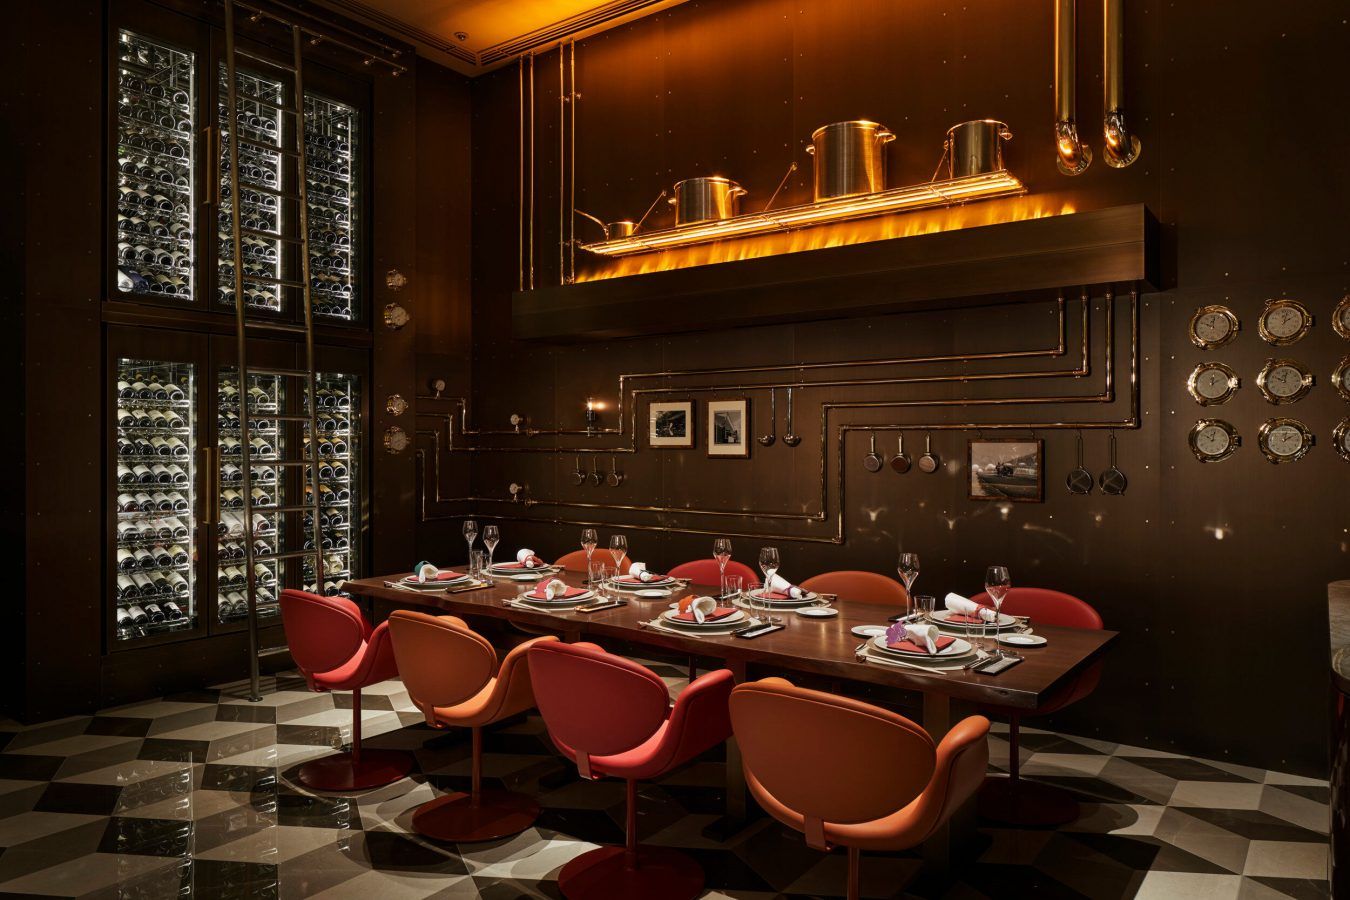 These luxury fashion houses are taking over restaurants all over the world